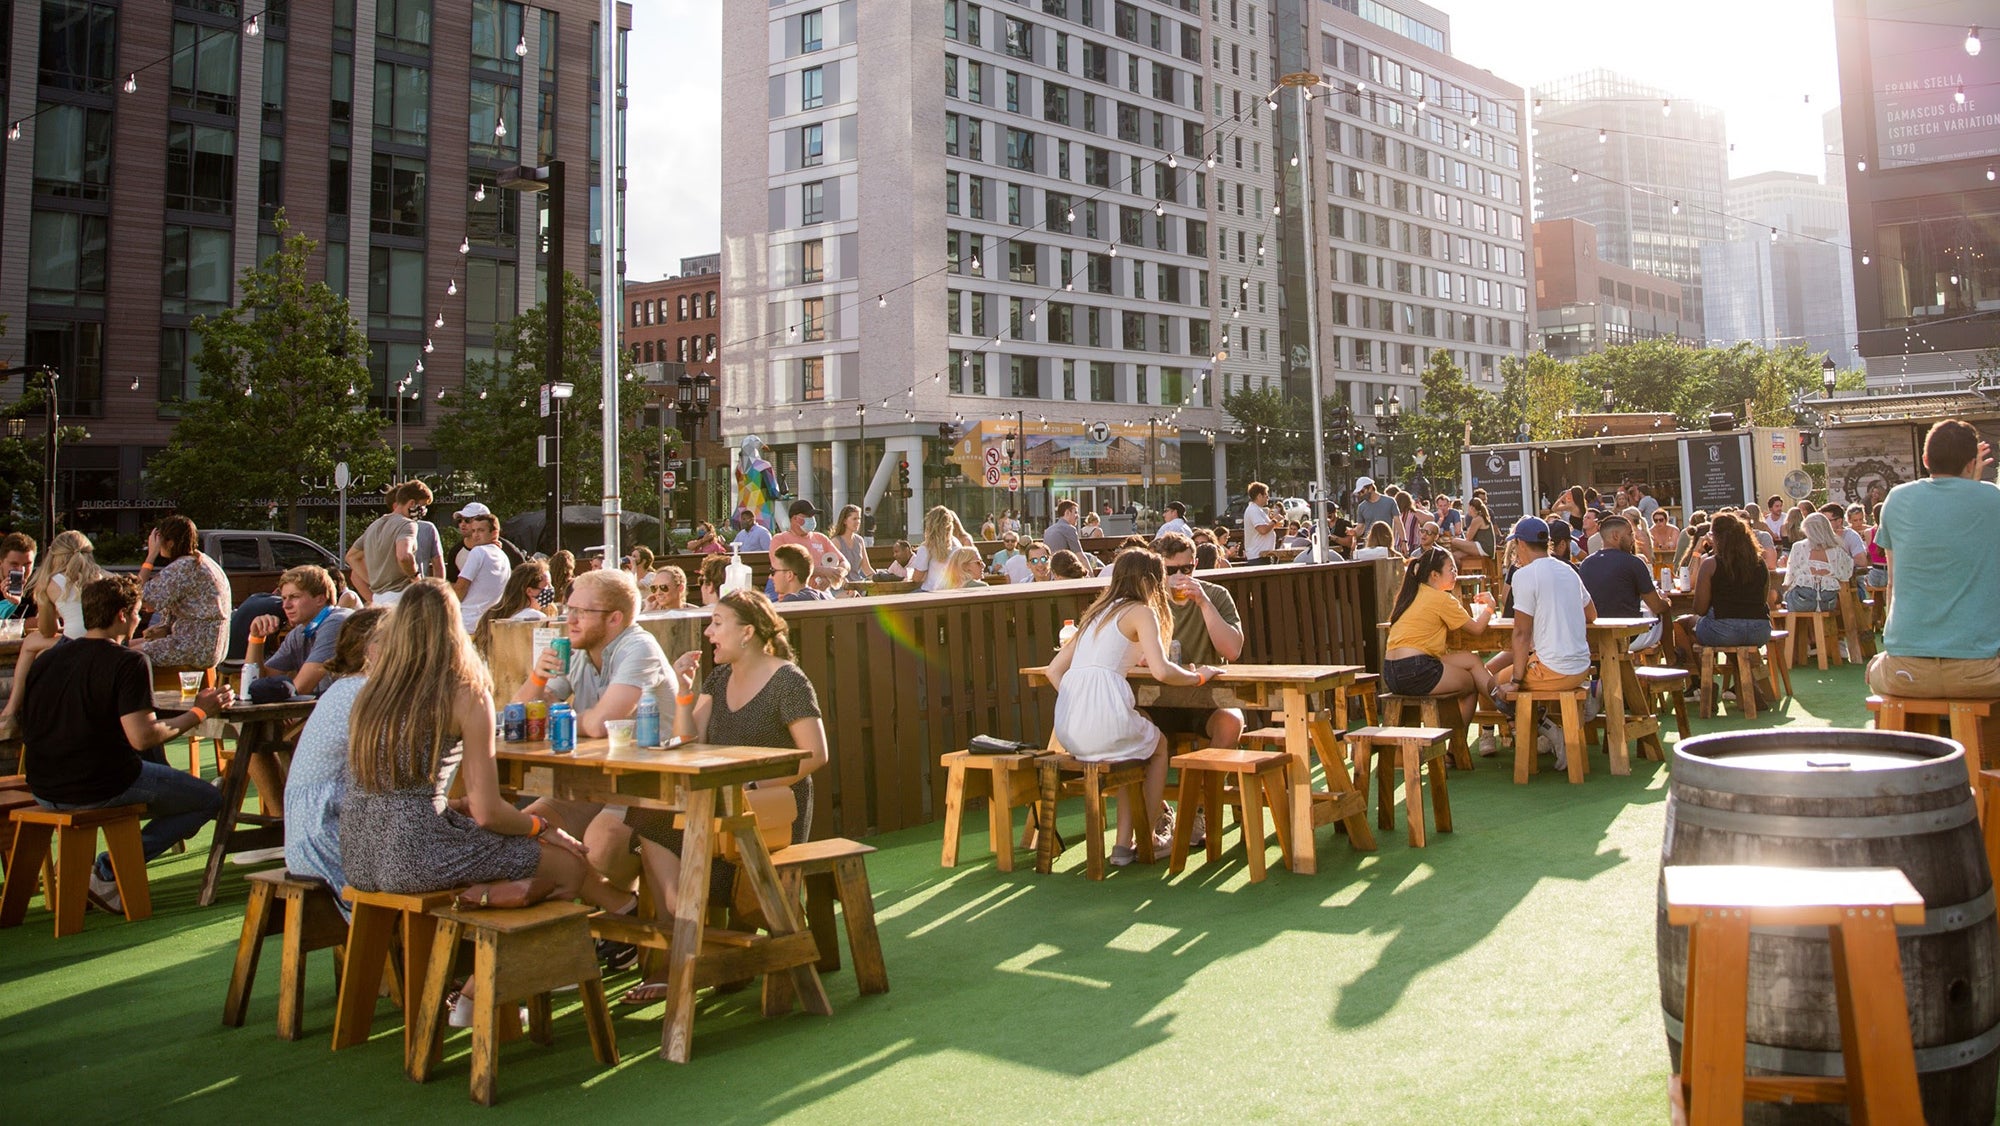 These Boston-area beer gardens are now open for the season